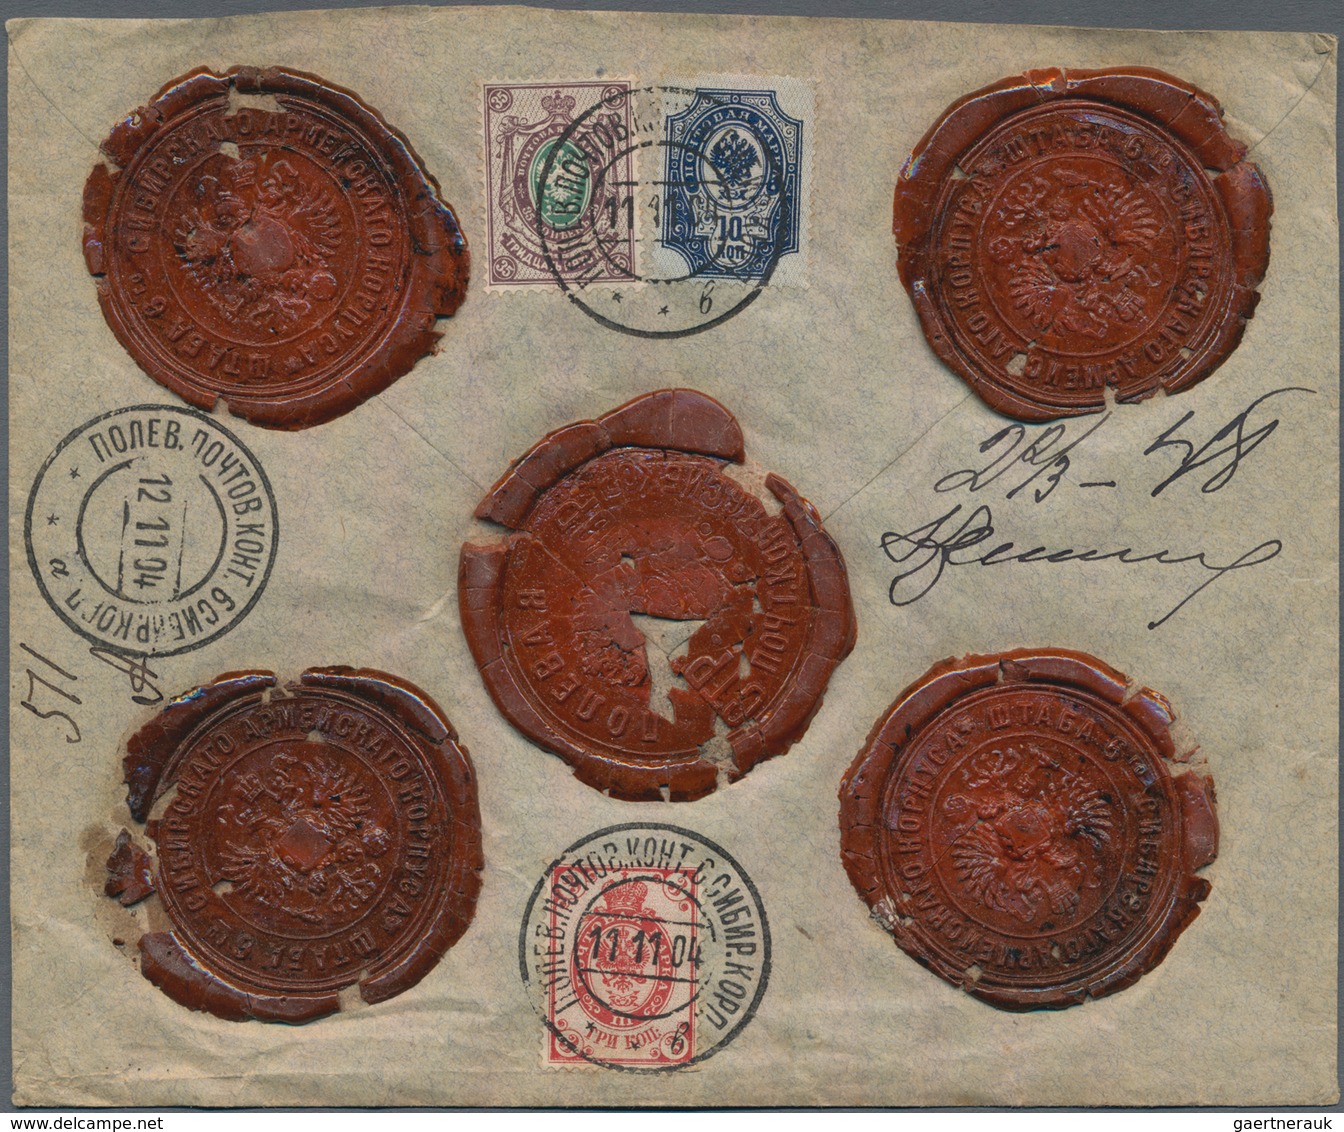 Russische Post In China: 11.11.1904 Russo-Japanese War Insured Money-letter For 162 Roubles Franked - Cina